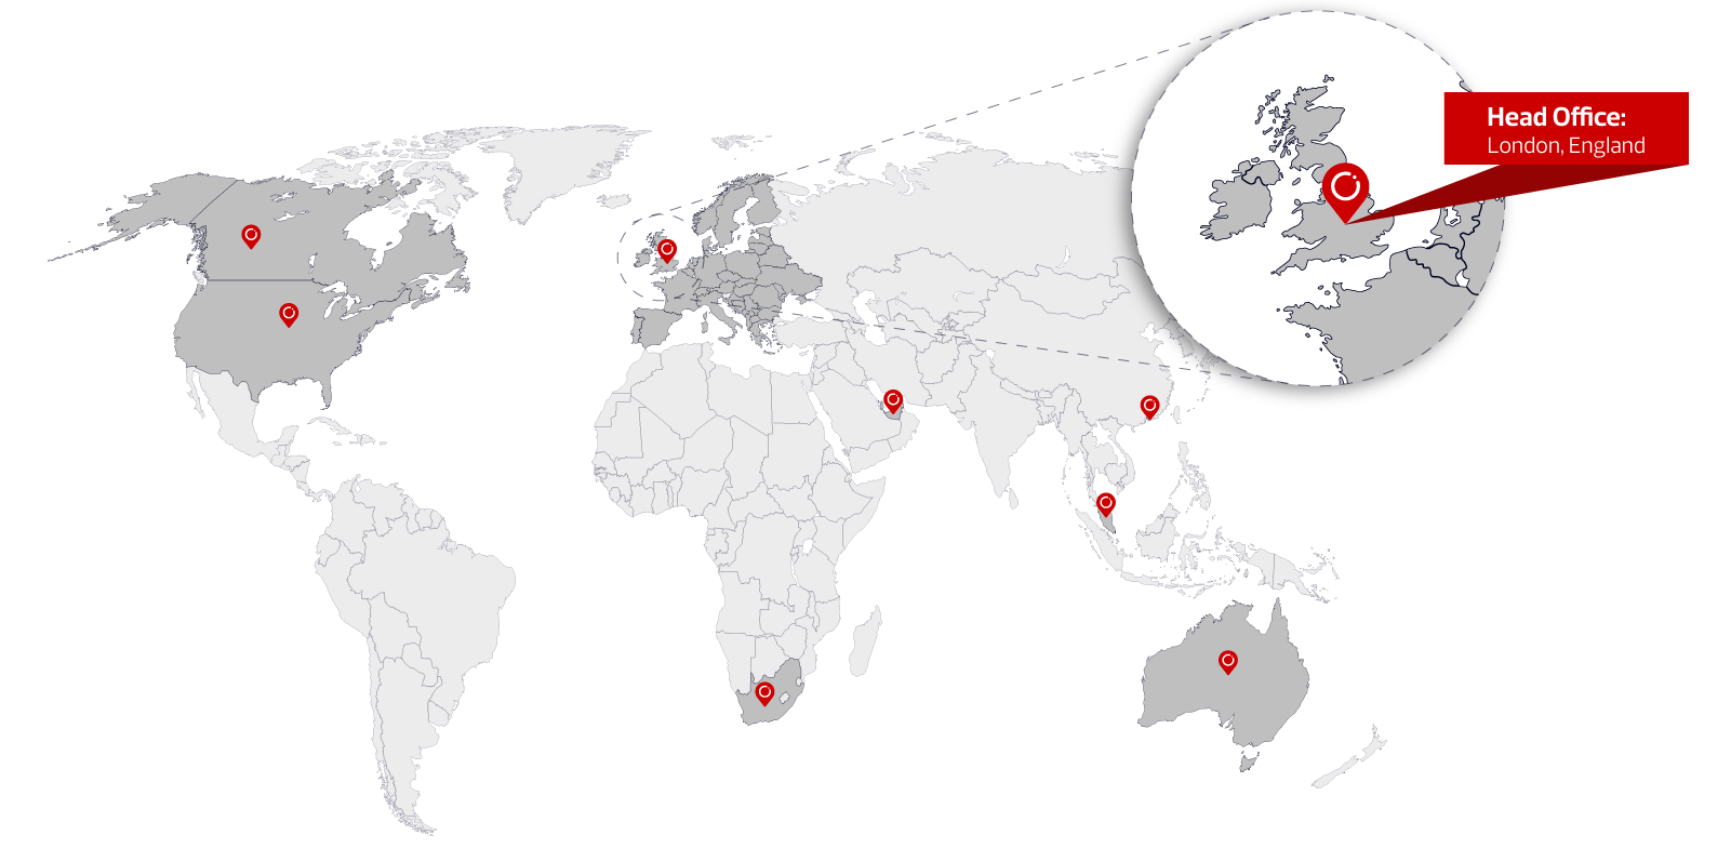 World Map of CDW Locations